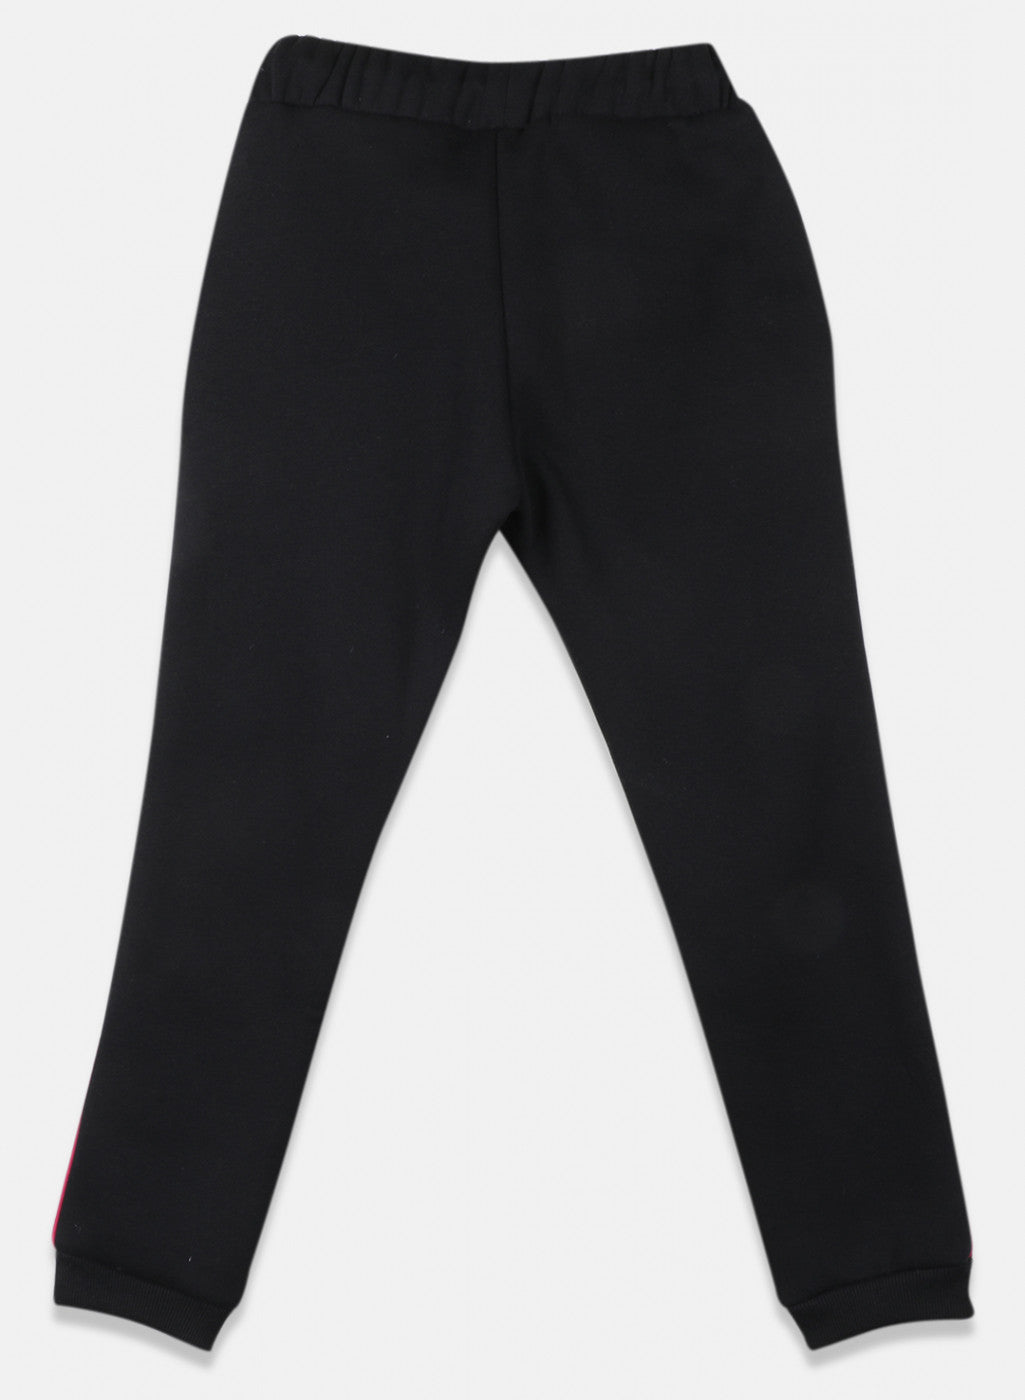 Black Cotton Lycra Plain Women's Ladies Girls Casual Formal Trouser Pants,  Size: 28 to 40 at Rs 375/piece in New Delhi